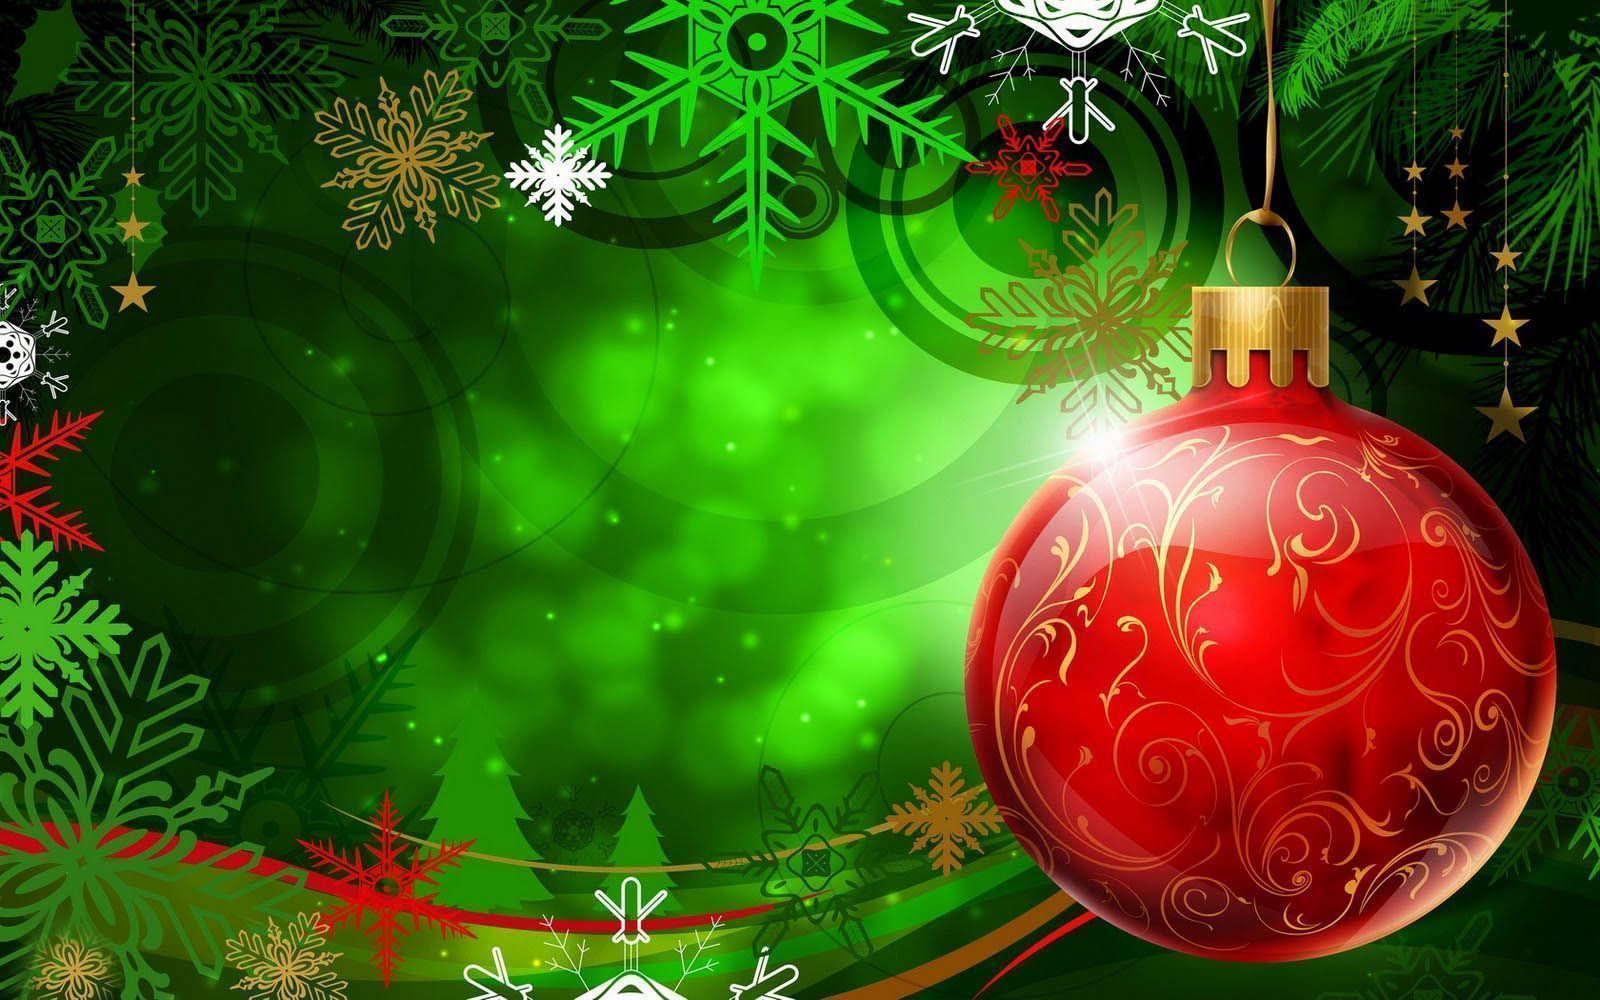 Free Christmas background pictures ~ Toptenpack.com